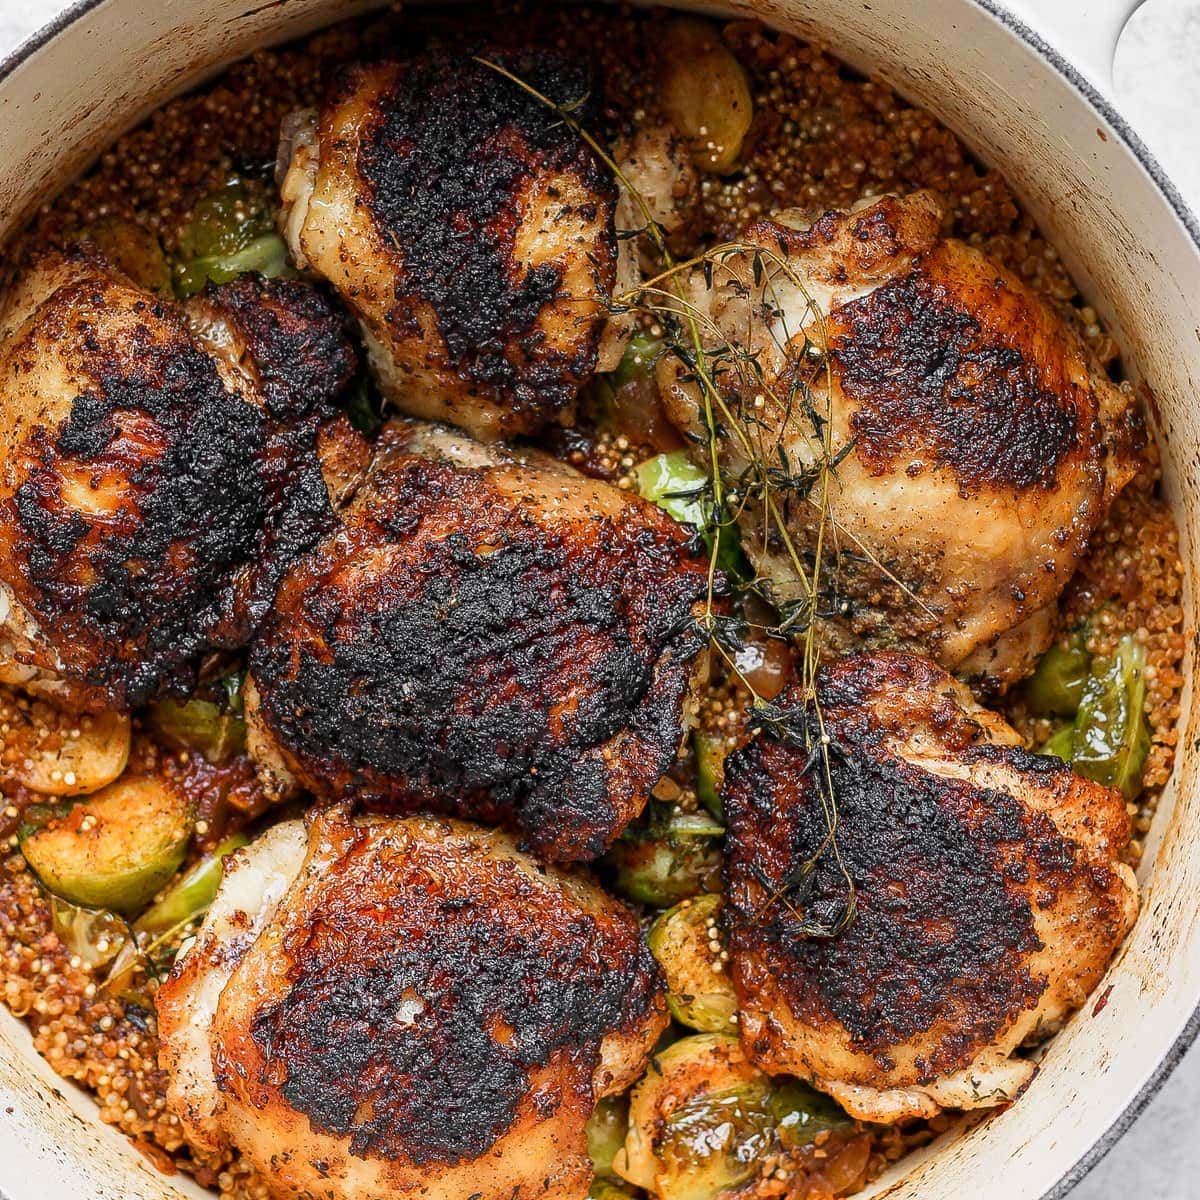 https://fitfoodiefinds.com/wp-content/uploads/2021/03/dutch-oven-chicken-thighs-8-sq.jpg